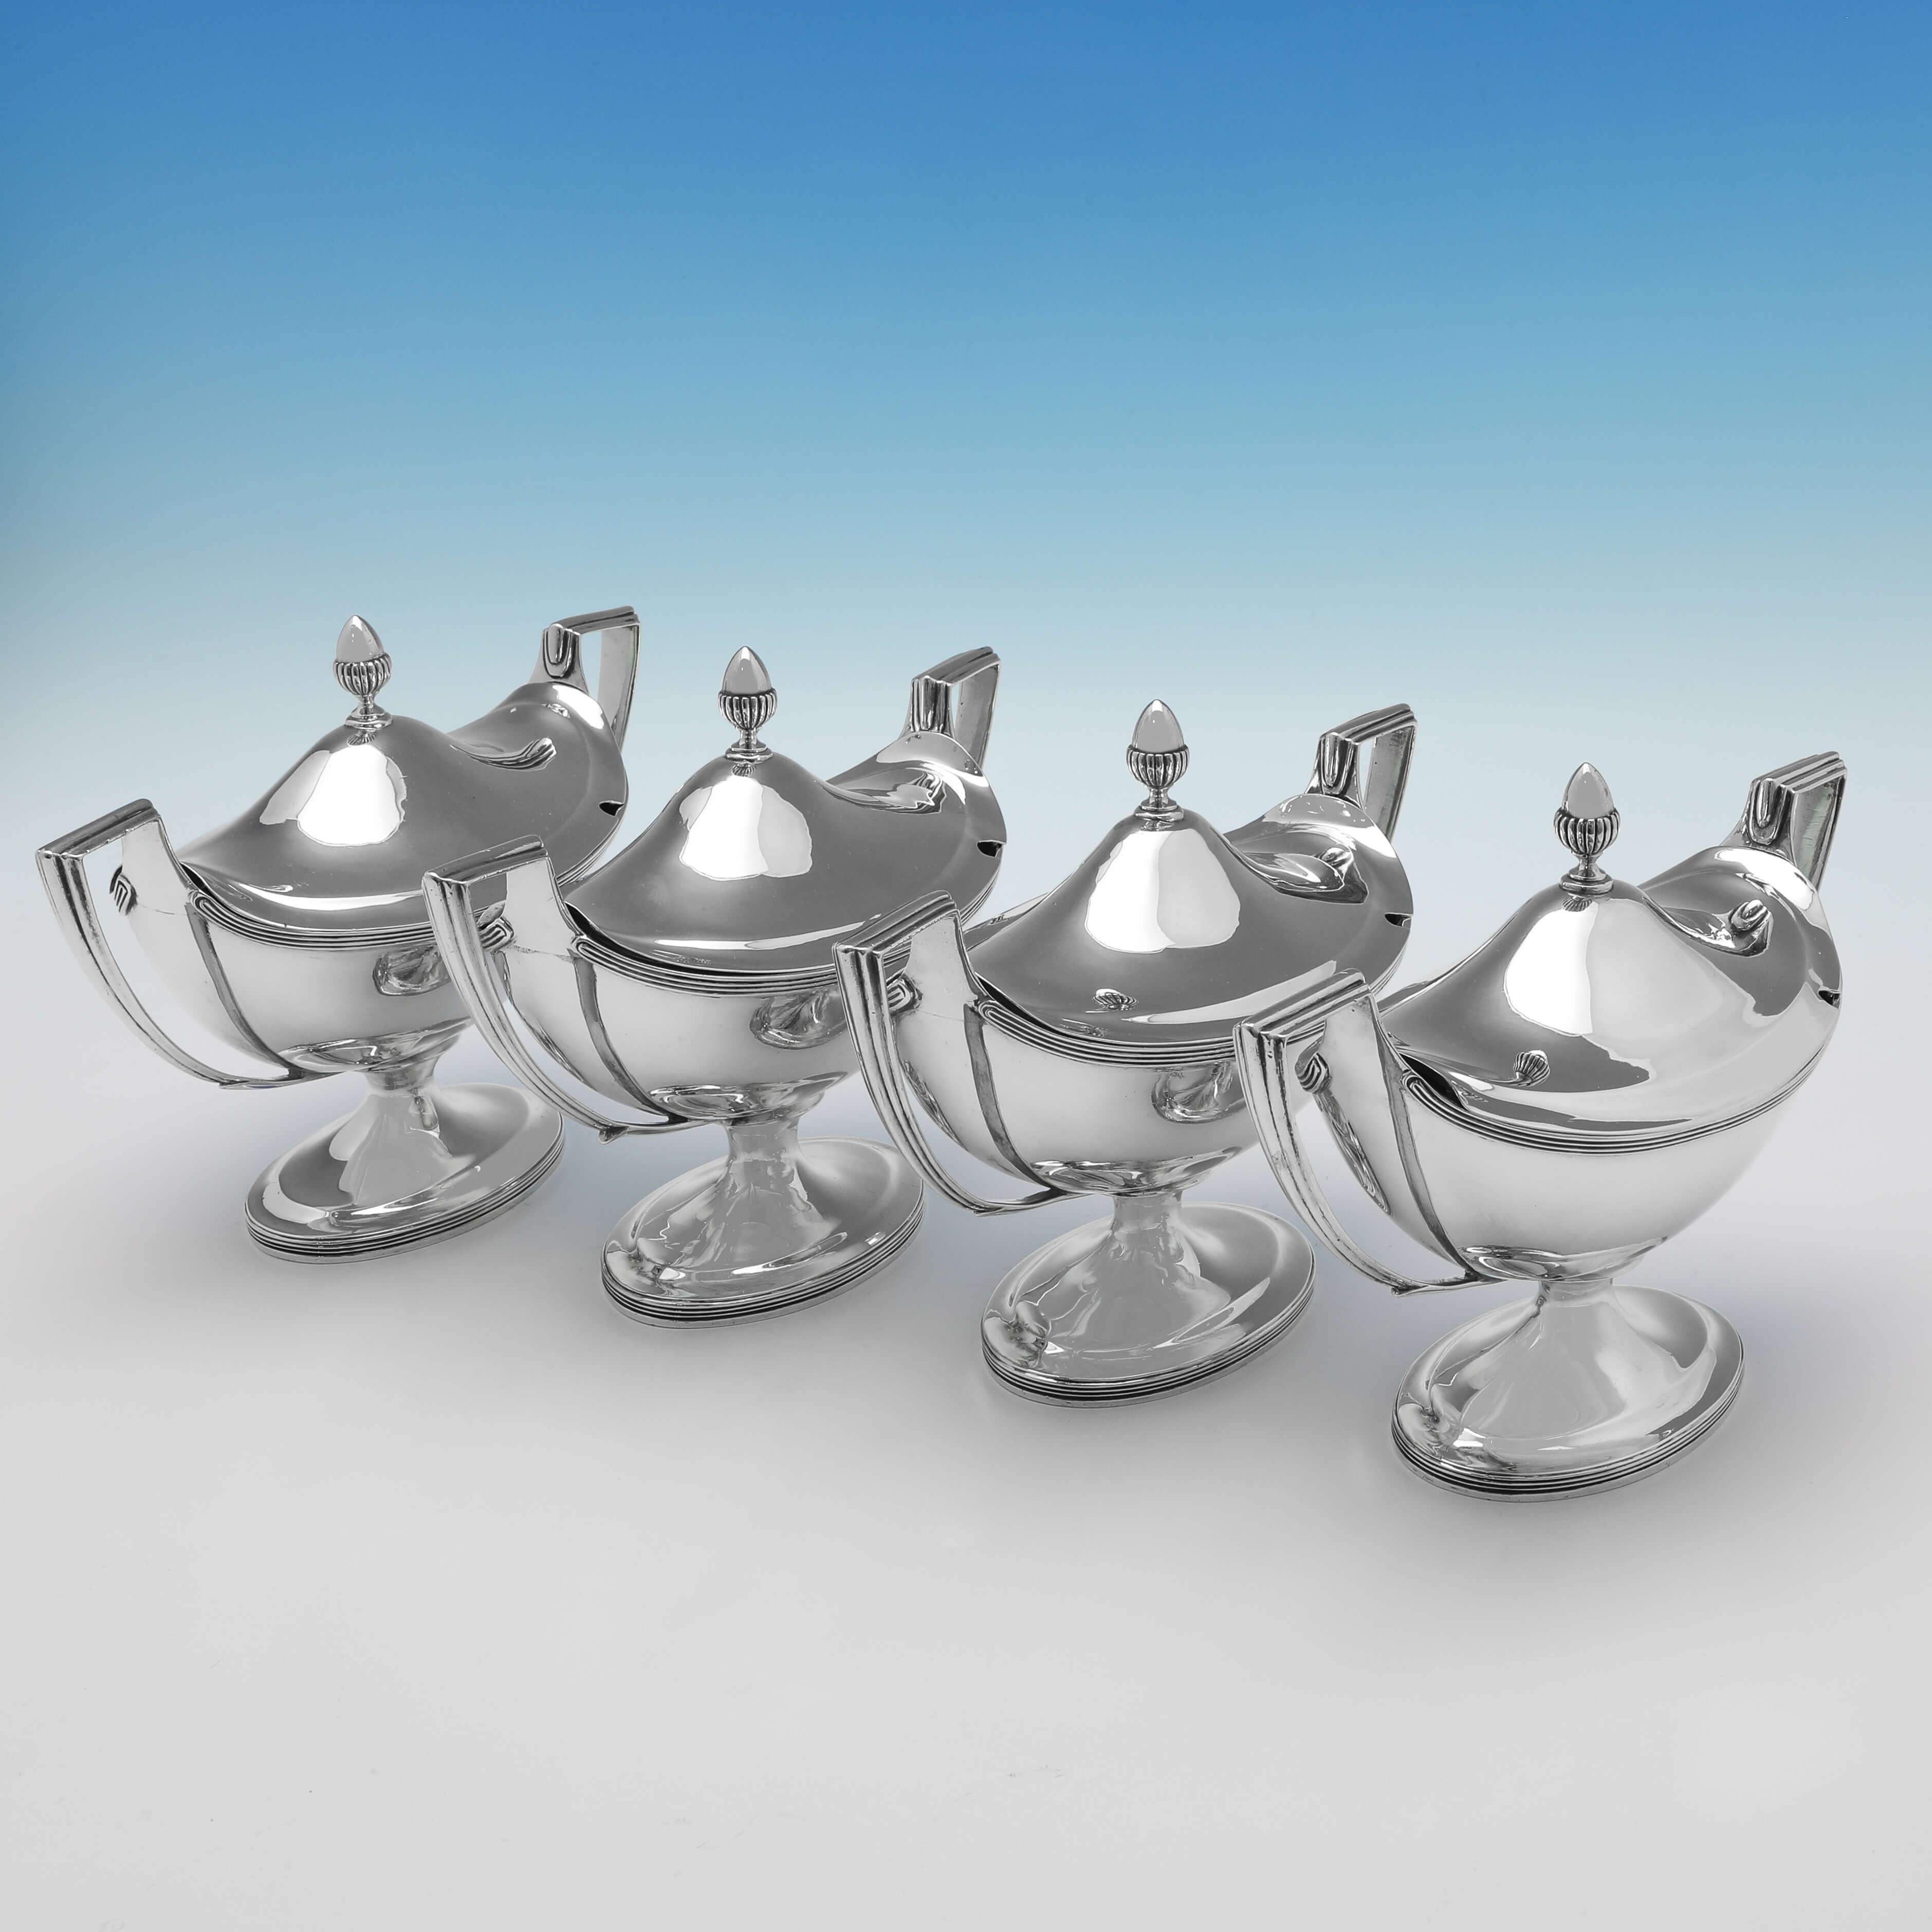 Hallmarked in London in 1802 & 1803 by John Emes, this handsome set of 4, George III, Antique sterling silver sauce tureens, are 'Boat' shaped, and plain in design, featuring reed borders and acorn finials. Each sauce tureen measures 6